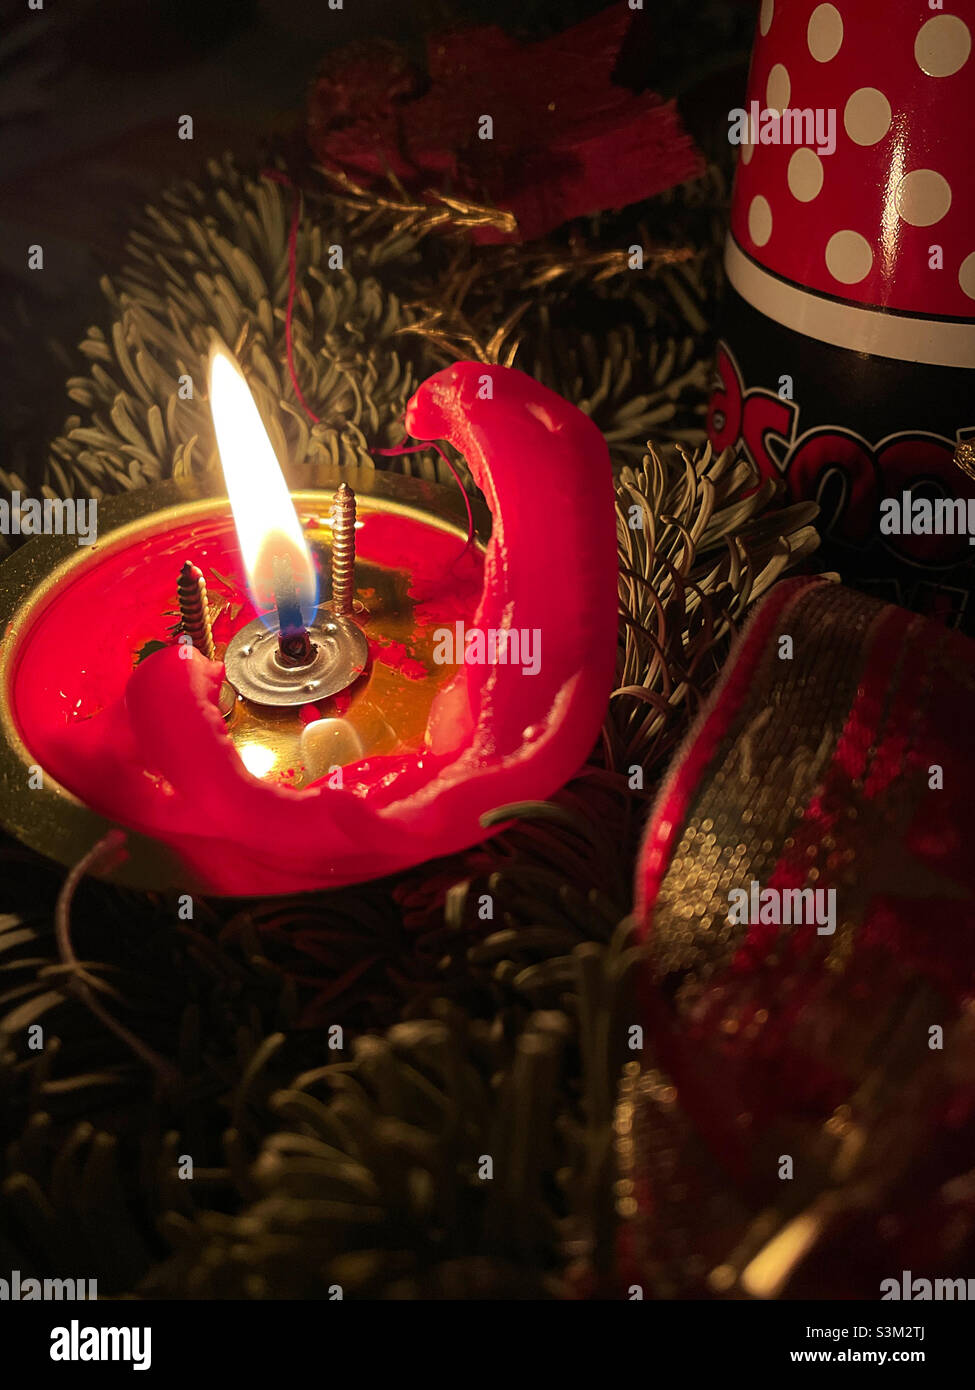 One Candle. Stock Photo